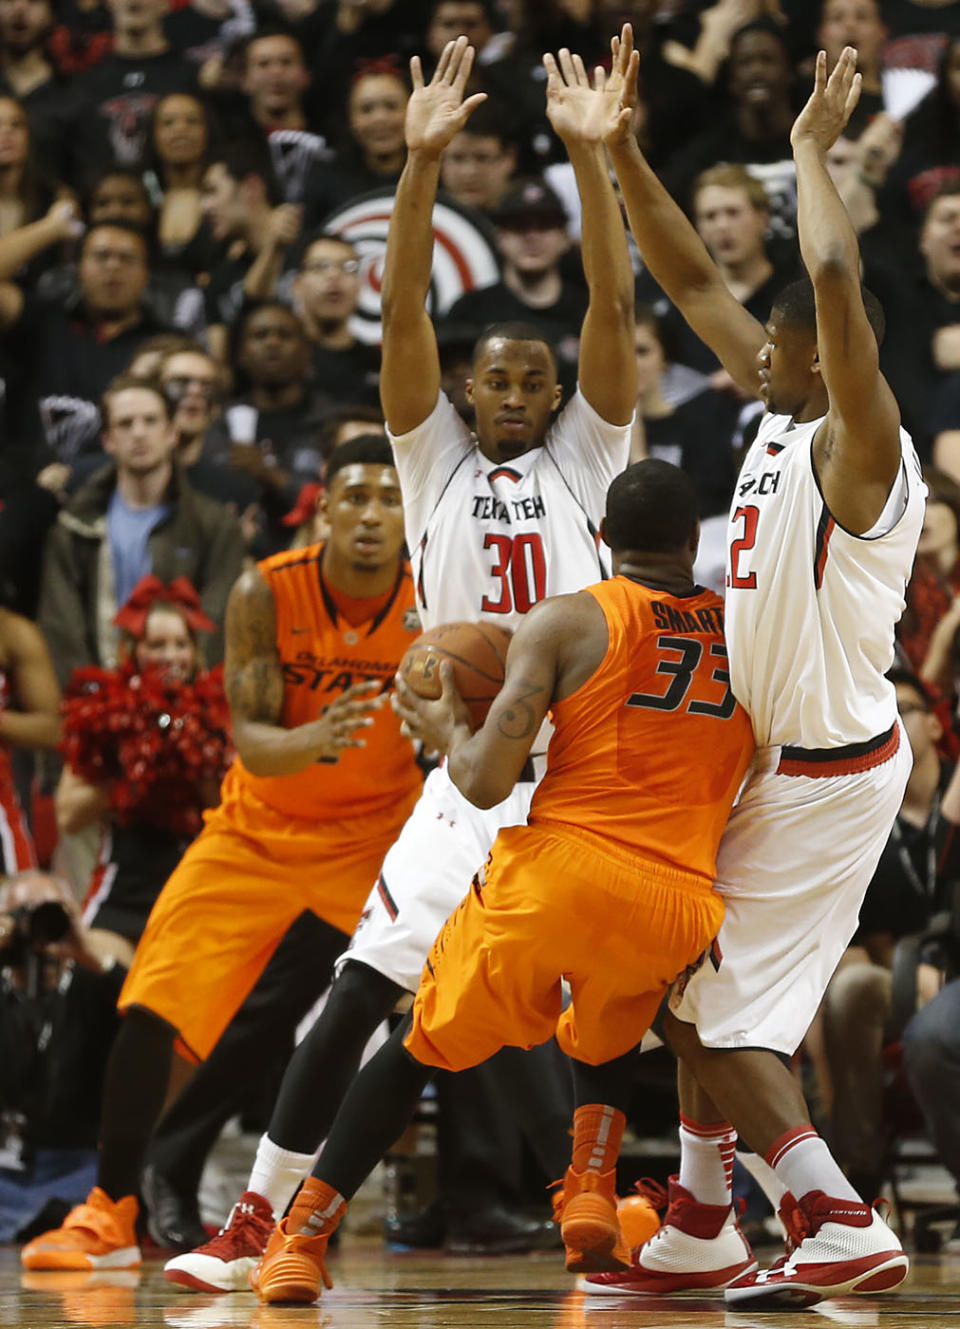 Texas Tech's Jaye Crockett(30) and Jordan Tolbert(32) defend Oklahoma State's Marcus Smart(33) during their NCAA college basketball game in Lubbock, Texas, Saturday, Feb, 8, 2014. (AP Photo/Lubbock Avalanche-Journal, Tori Eichberger) ALL LOCAL TV OUT